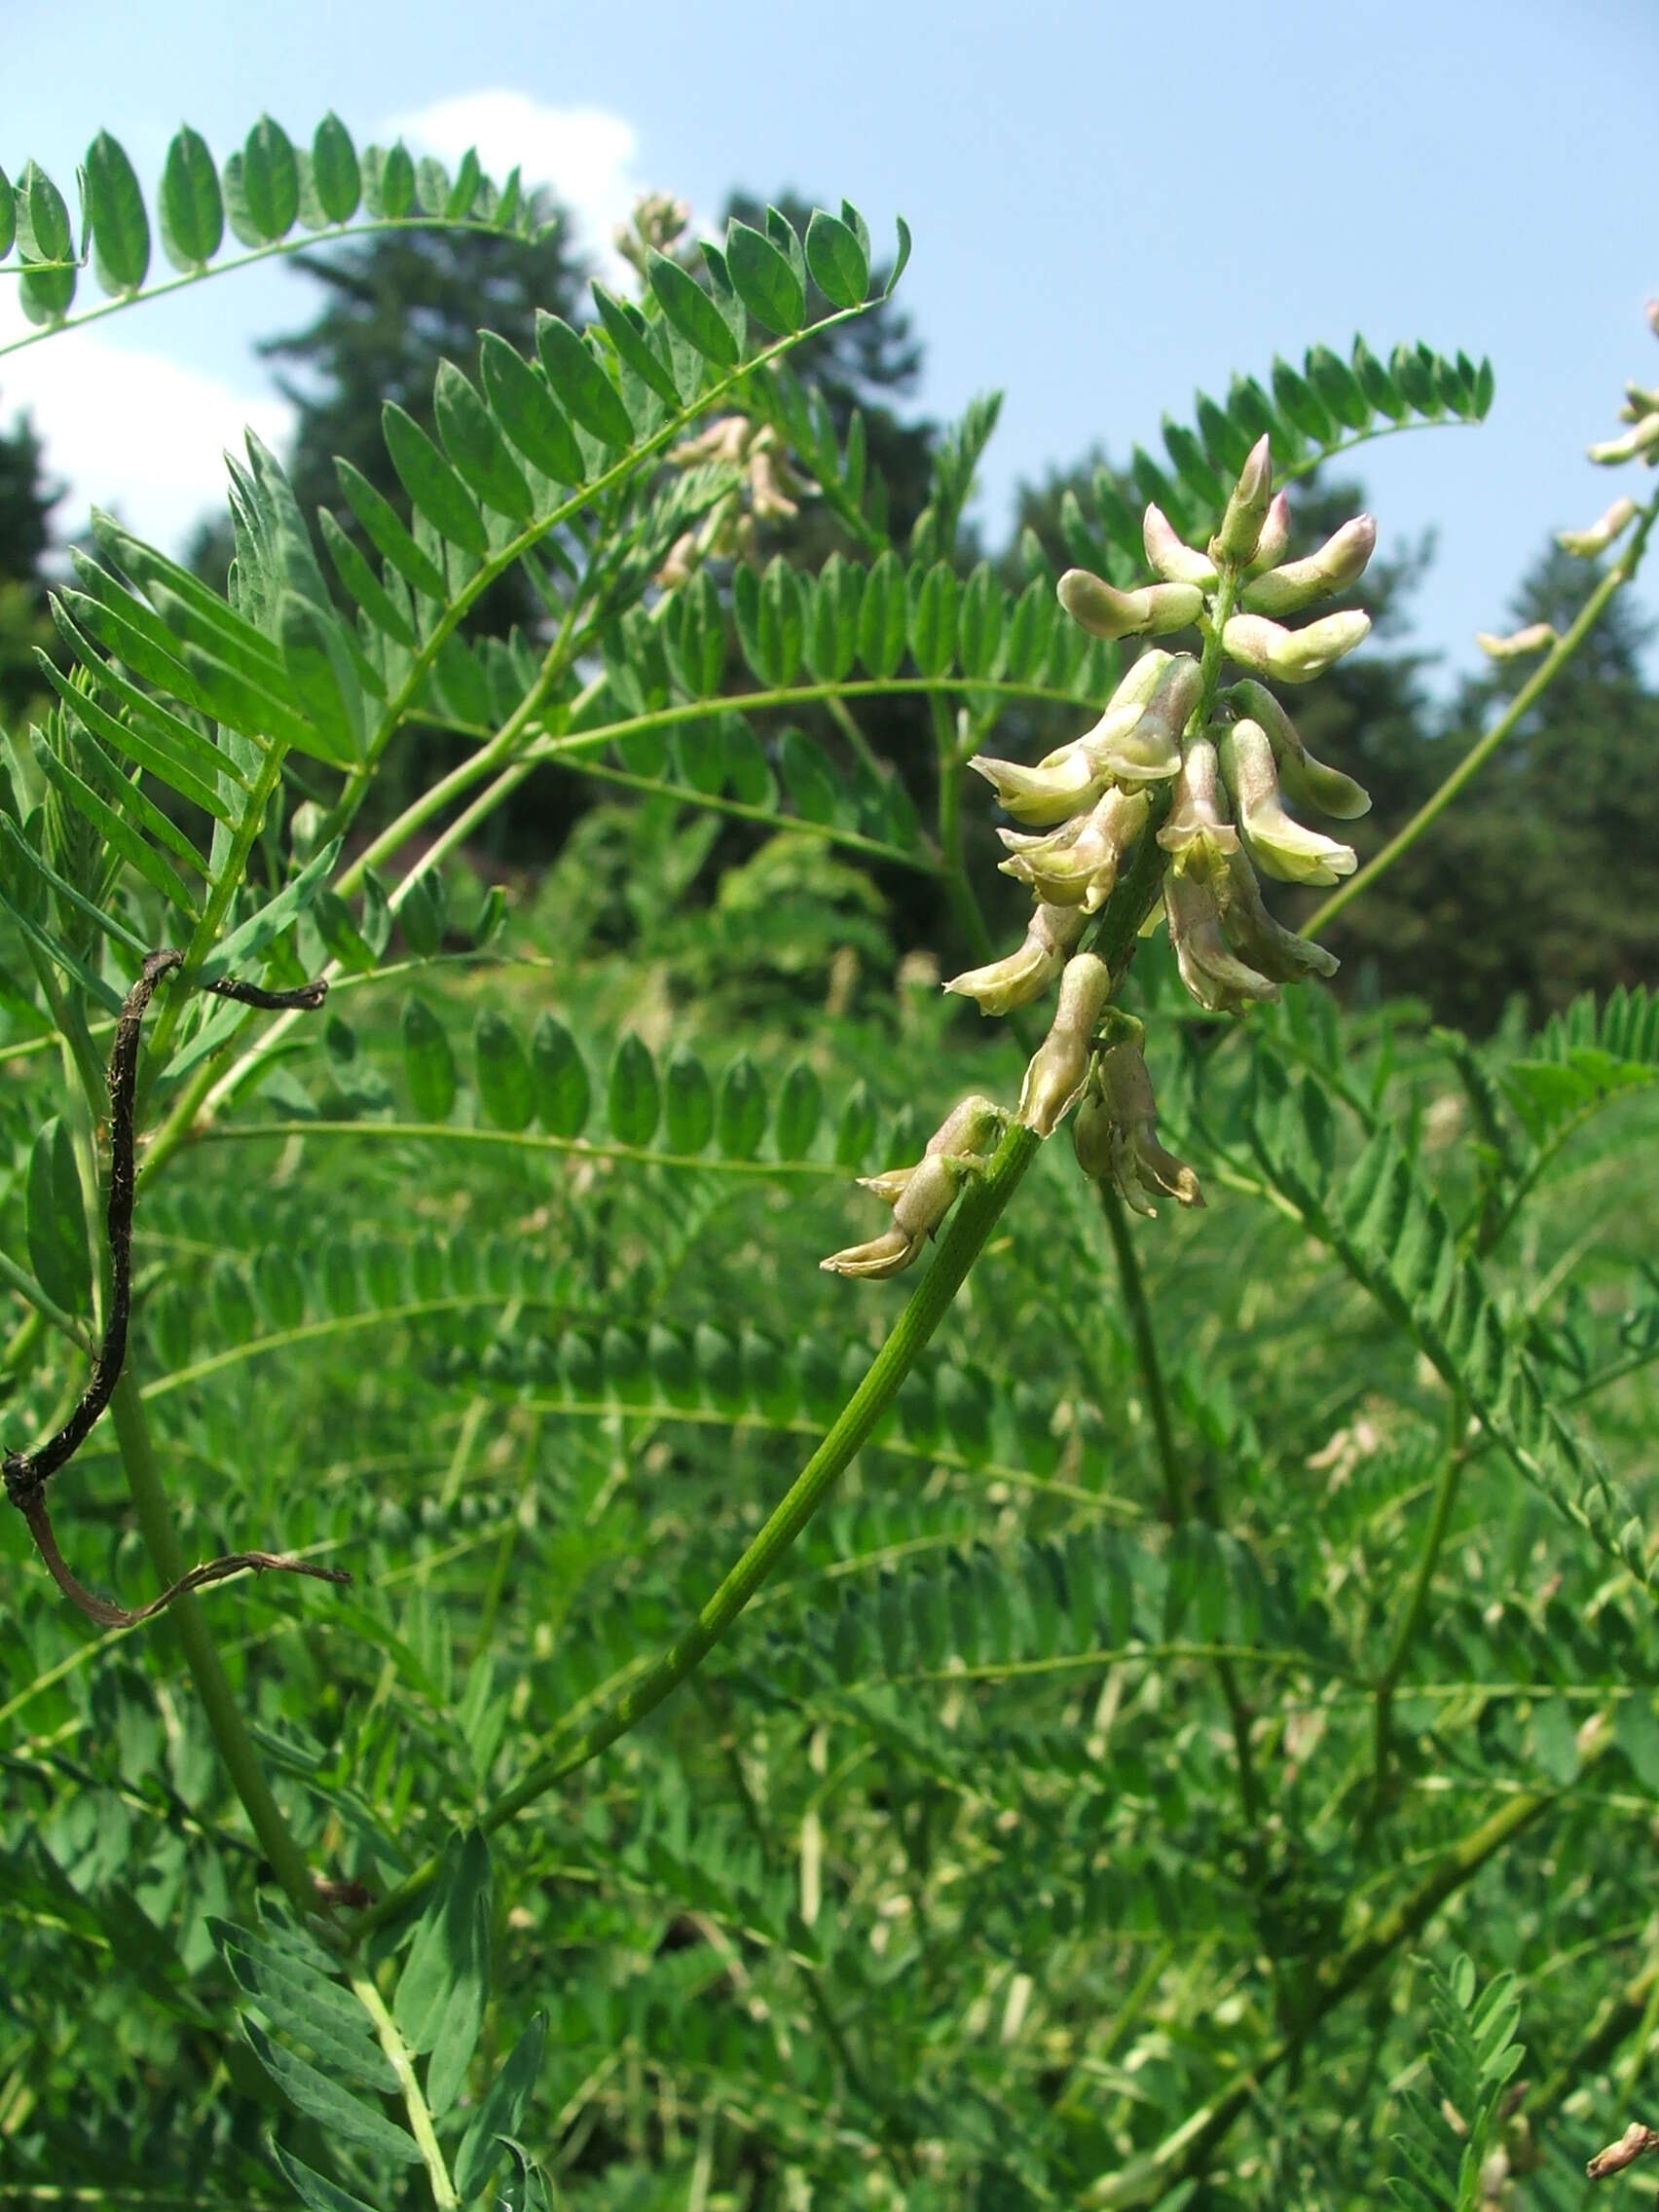 Image of Russian milkvetch